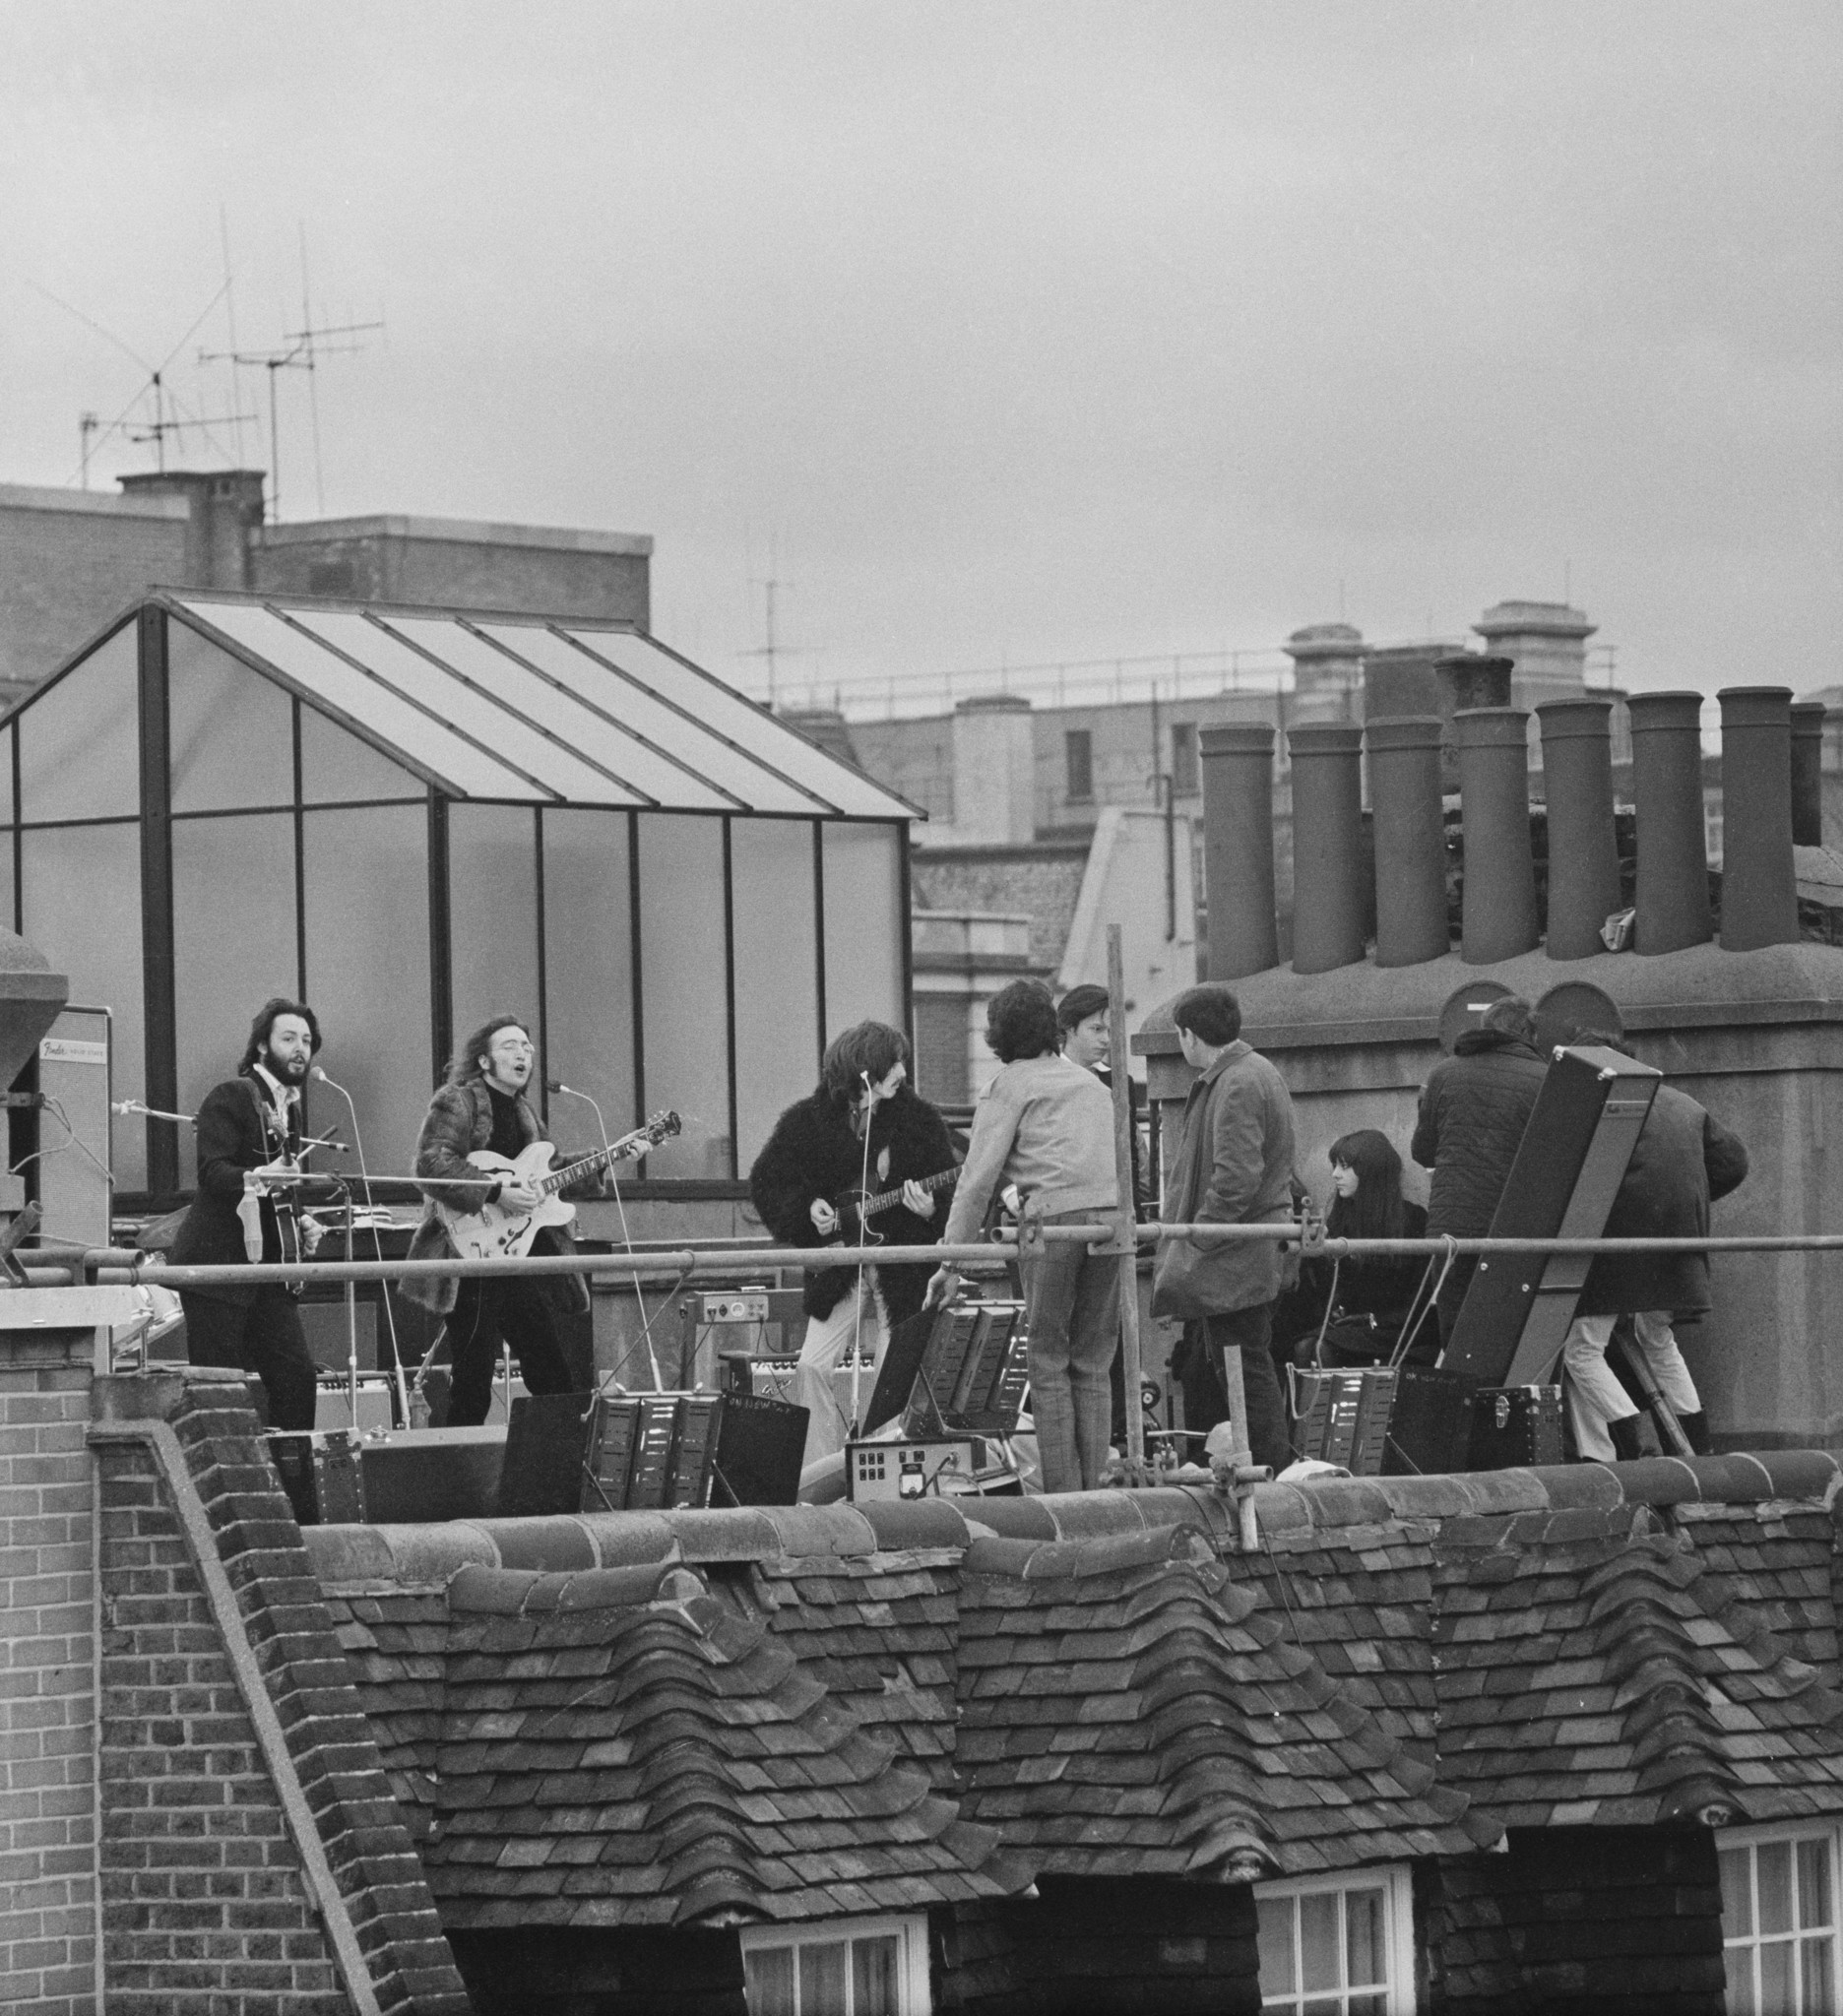 The Beatles perform their last live public concert on the rooftop of the Apple Organization building for director Michael Lindsey-Hogg's film documentary 